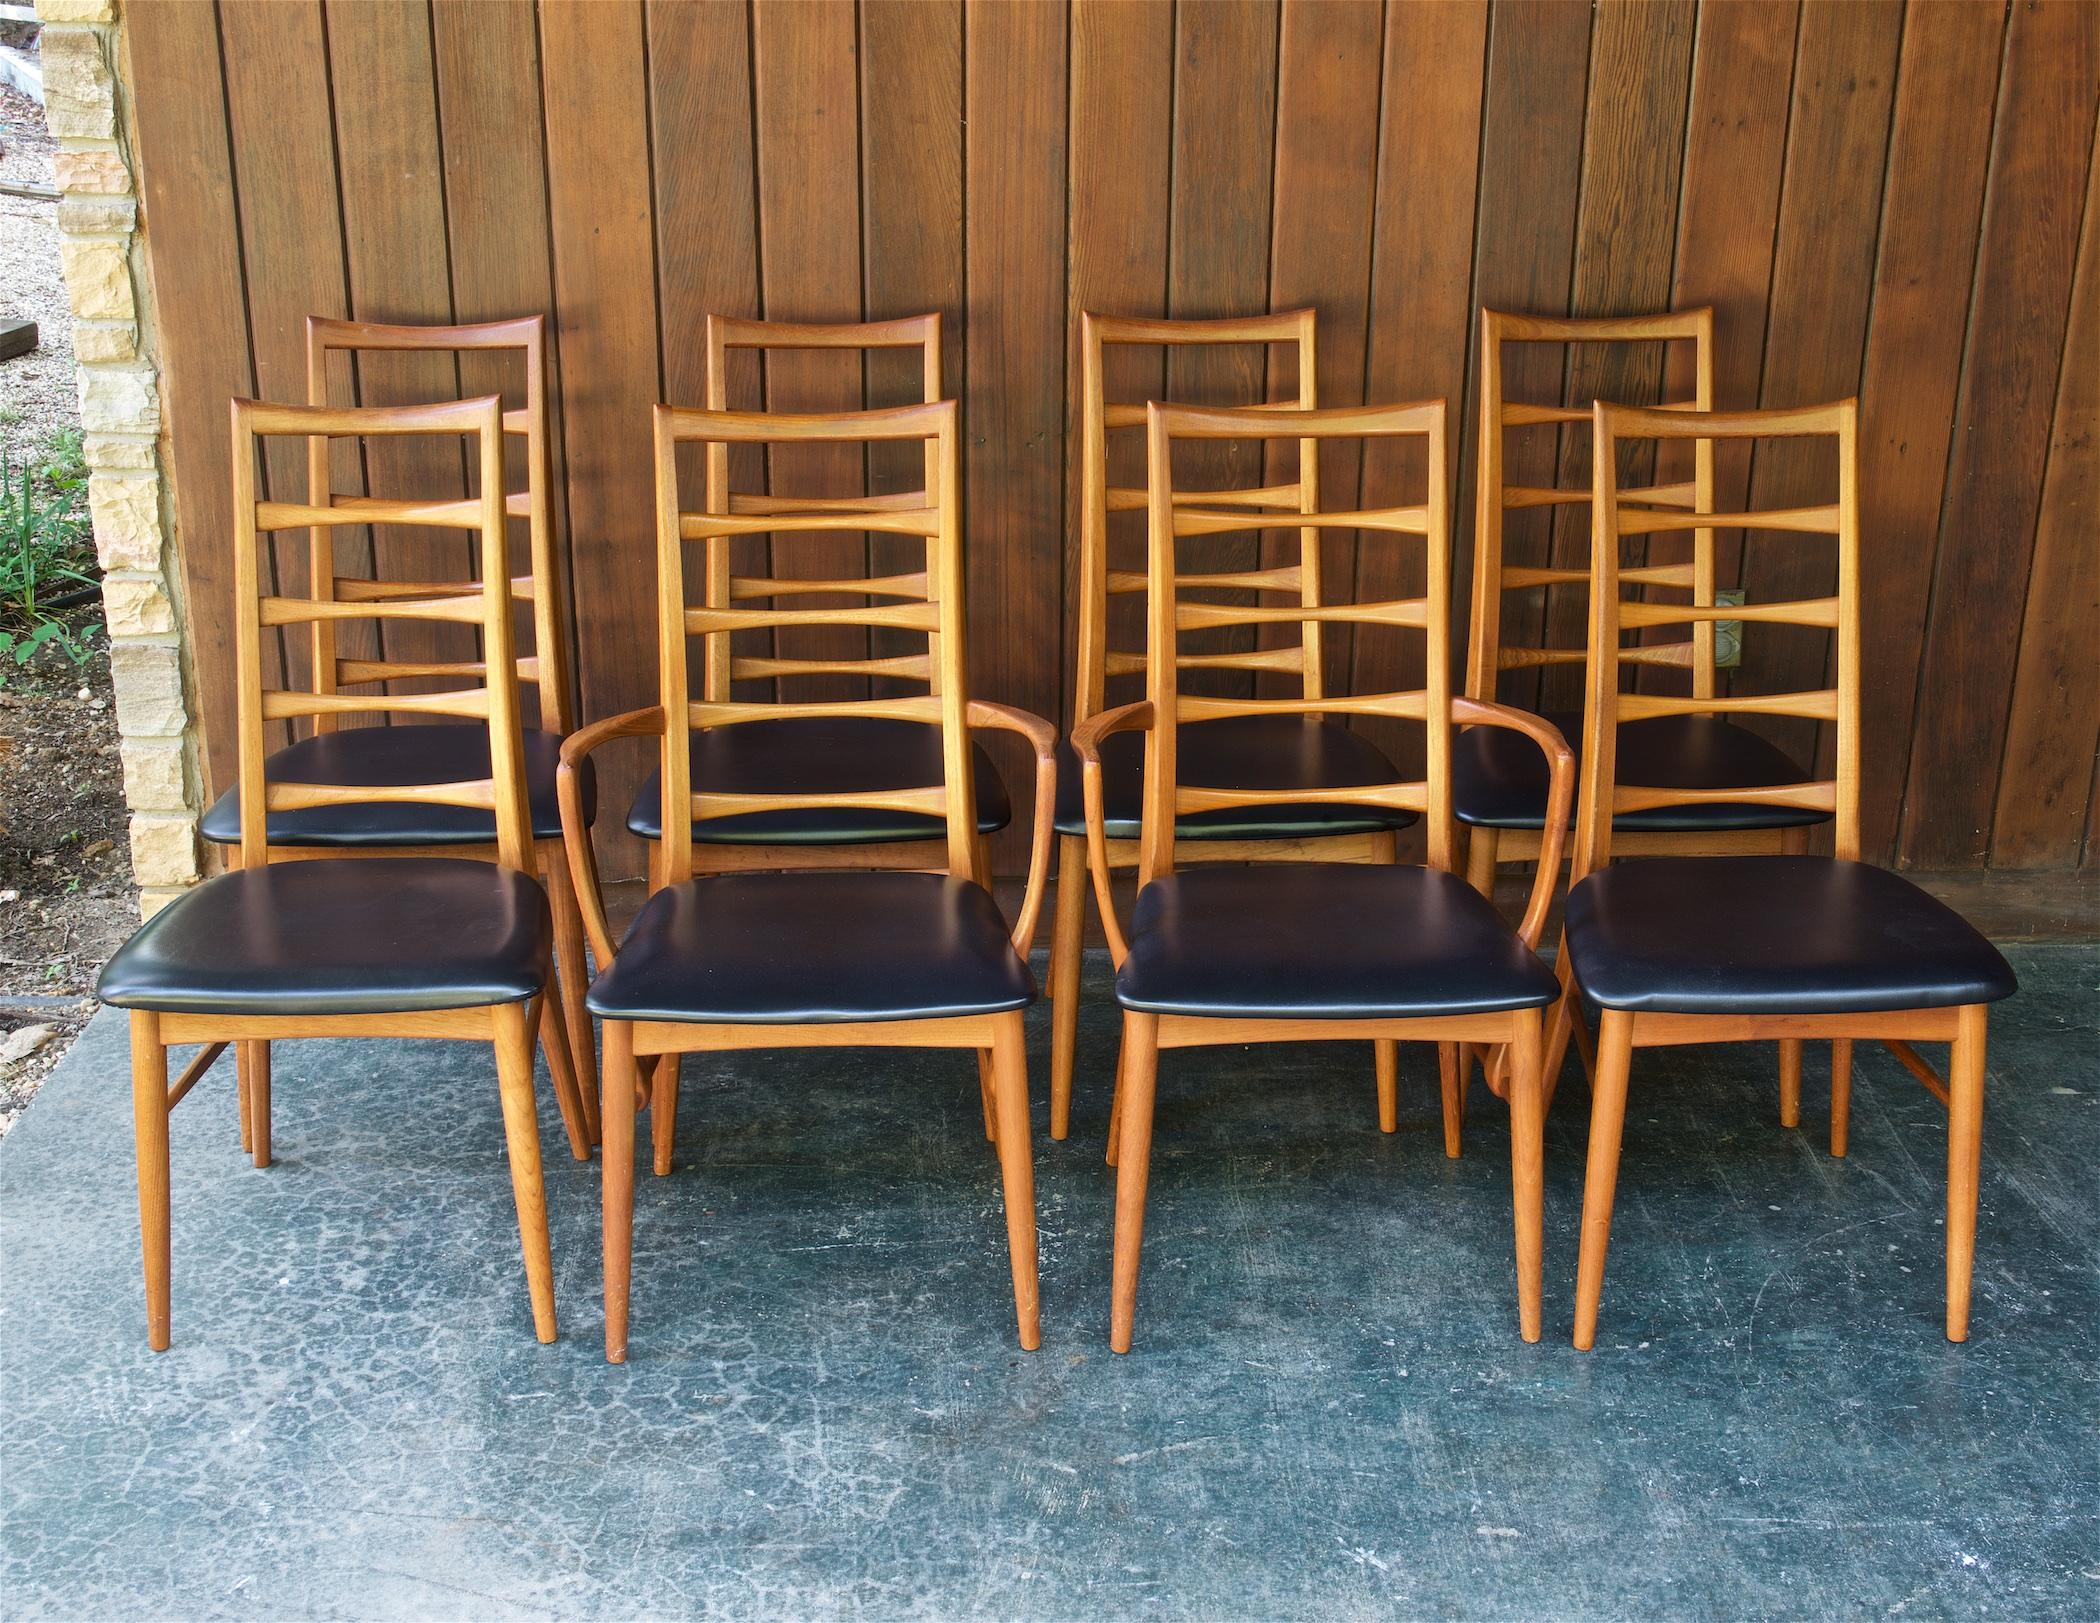 Nice original set of 8, all from the same estate. There are 6 highback side chairs, and 2 highback armchairs.

Overall these show light signs of wear, and are usable as-is. The frames are strong with tight joinery, and without cracks. All vinyl is